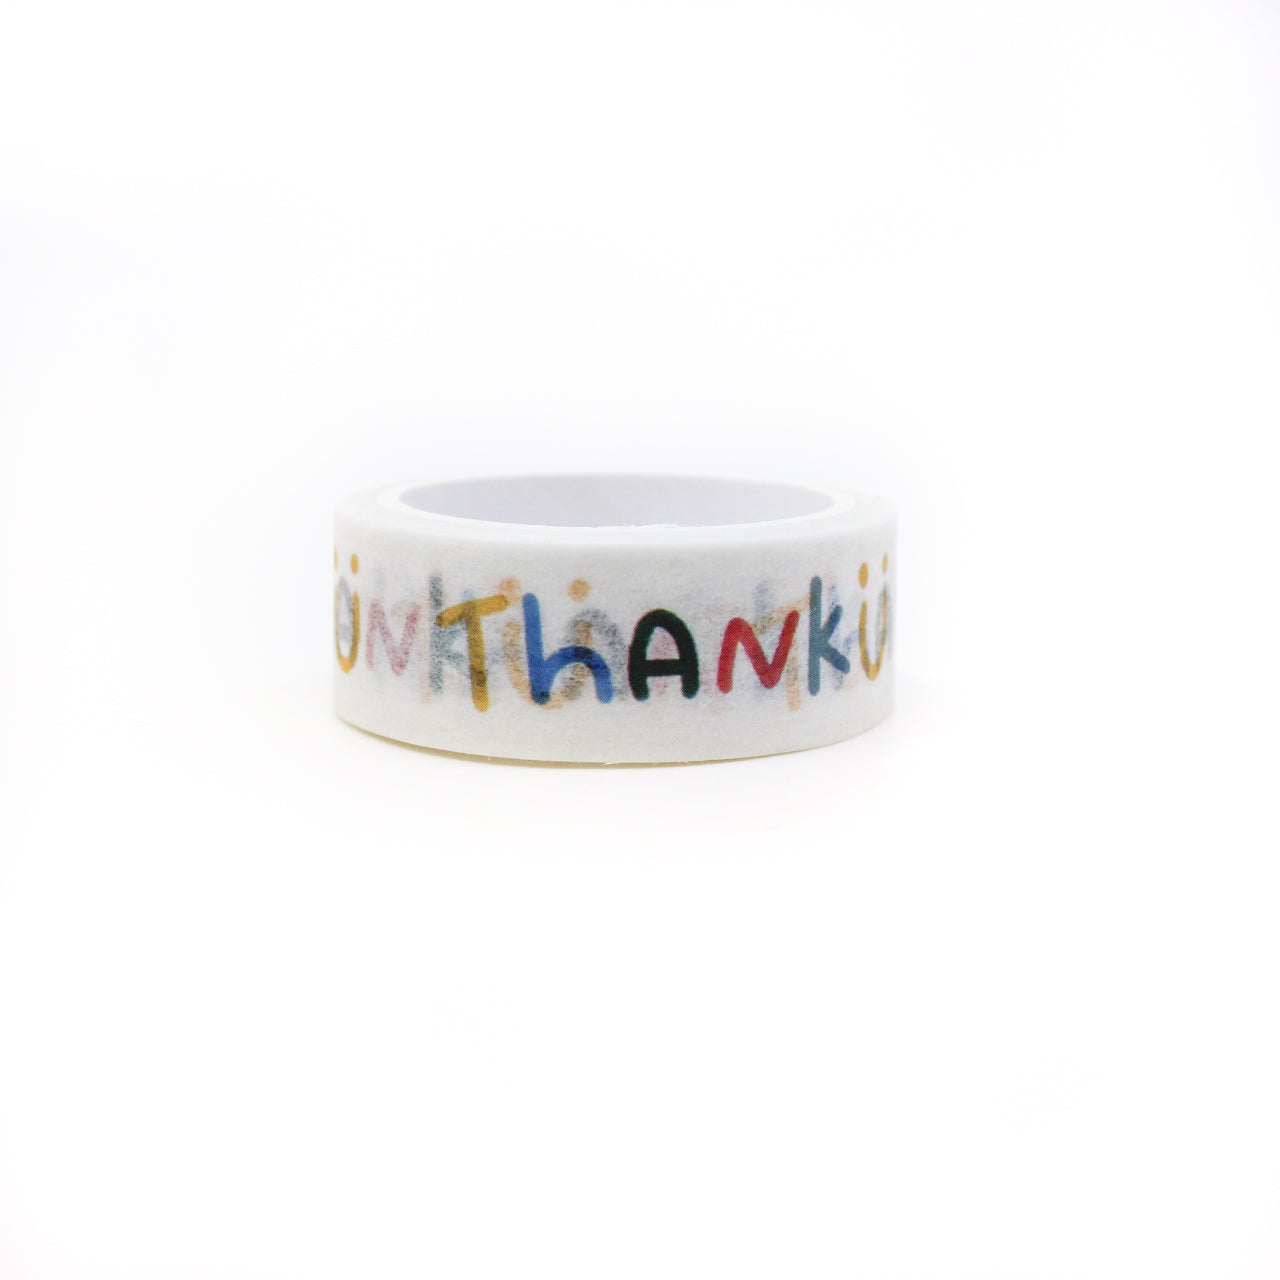 Vibrant washi tape featuring the words 'Thank U' alongside a cheerful smiling face. This playful design on a crisp white background adds a touch of gratitude and joy to your crafting projects. This tape is sold at BBB Supplies Craft Shop.